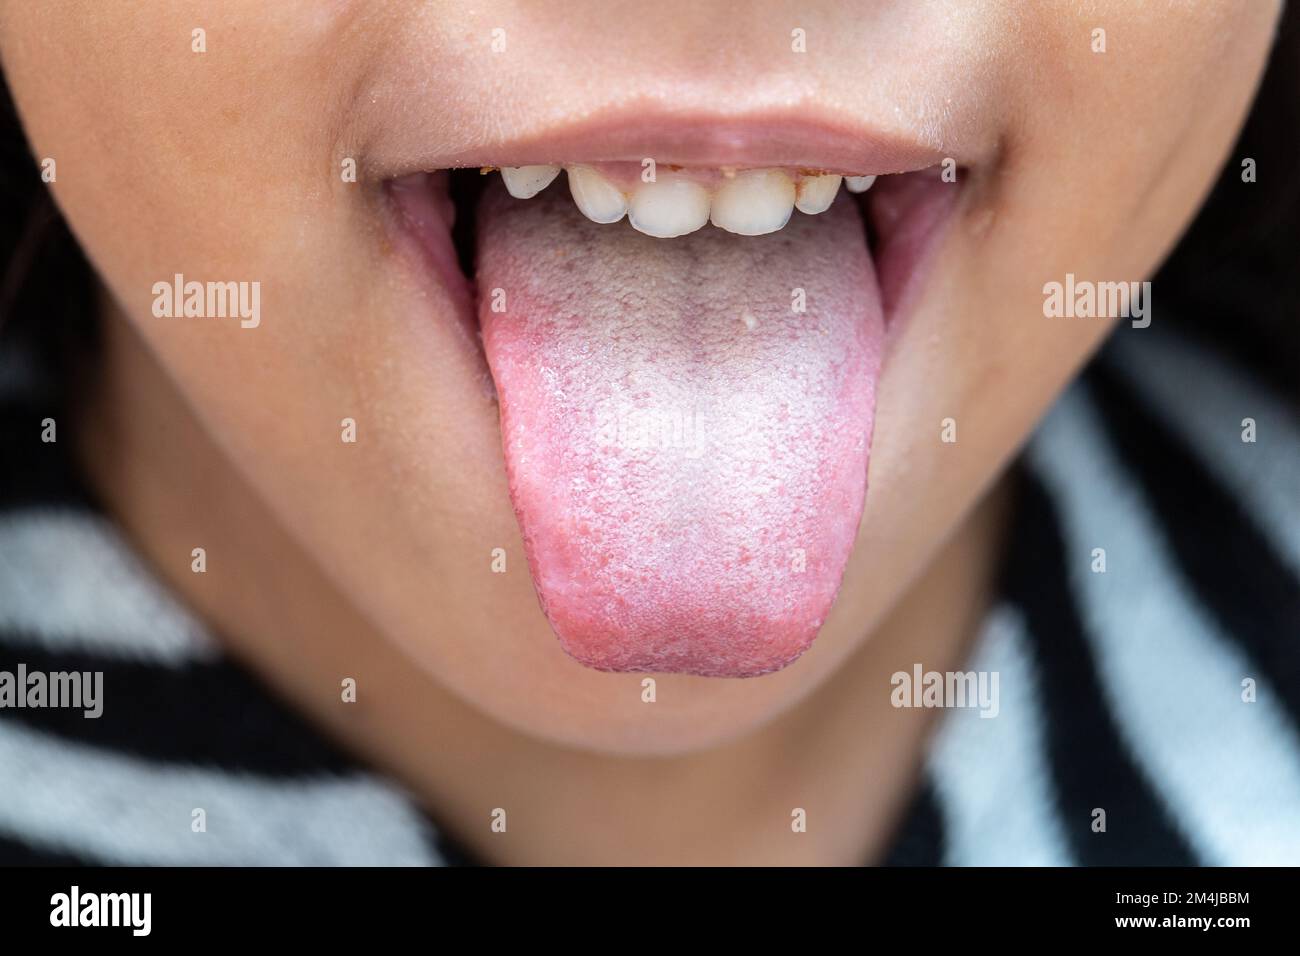 Close-up of a little girl's tongue with bacterial patina due to poor oral hygiene or poor nutrition. Stock Photo